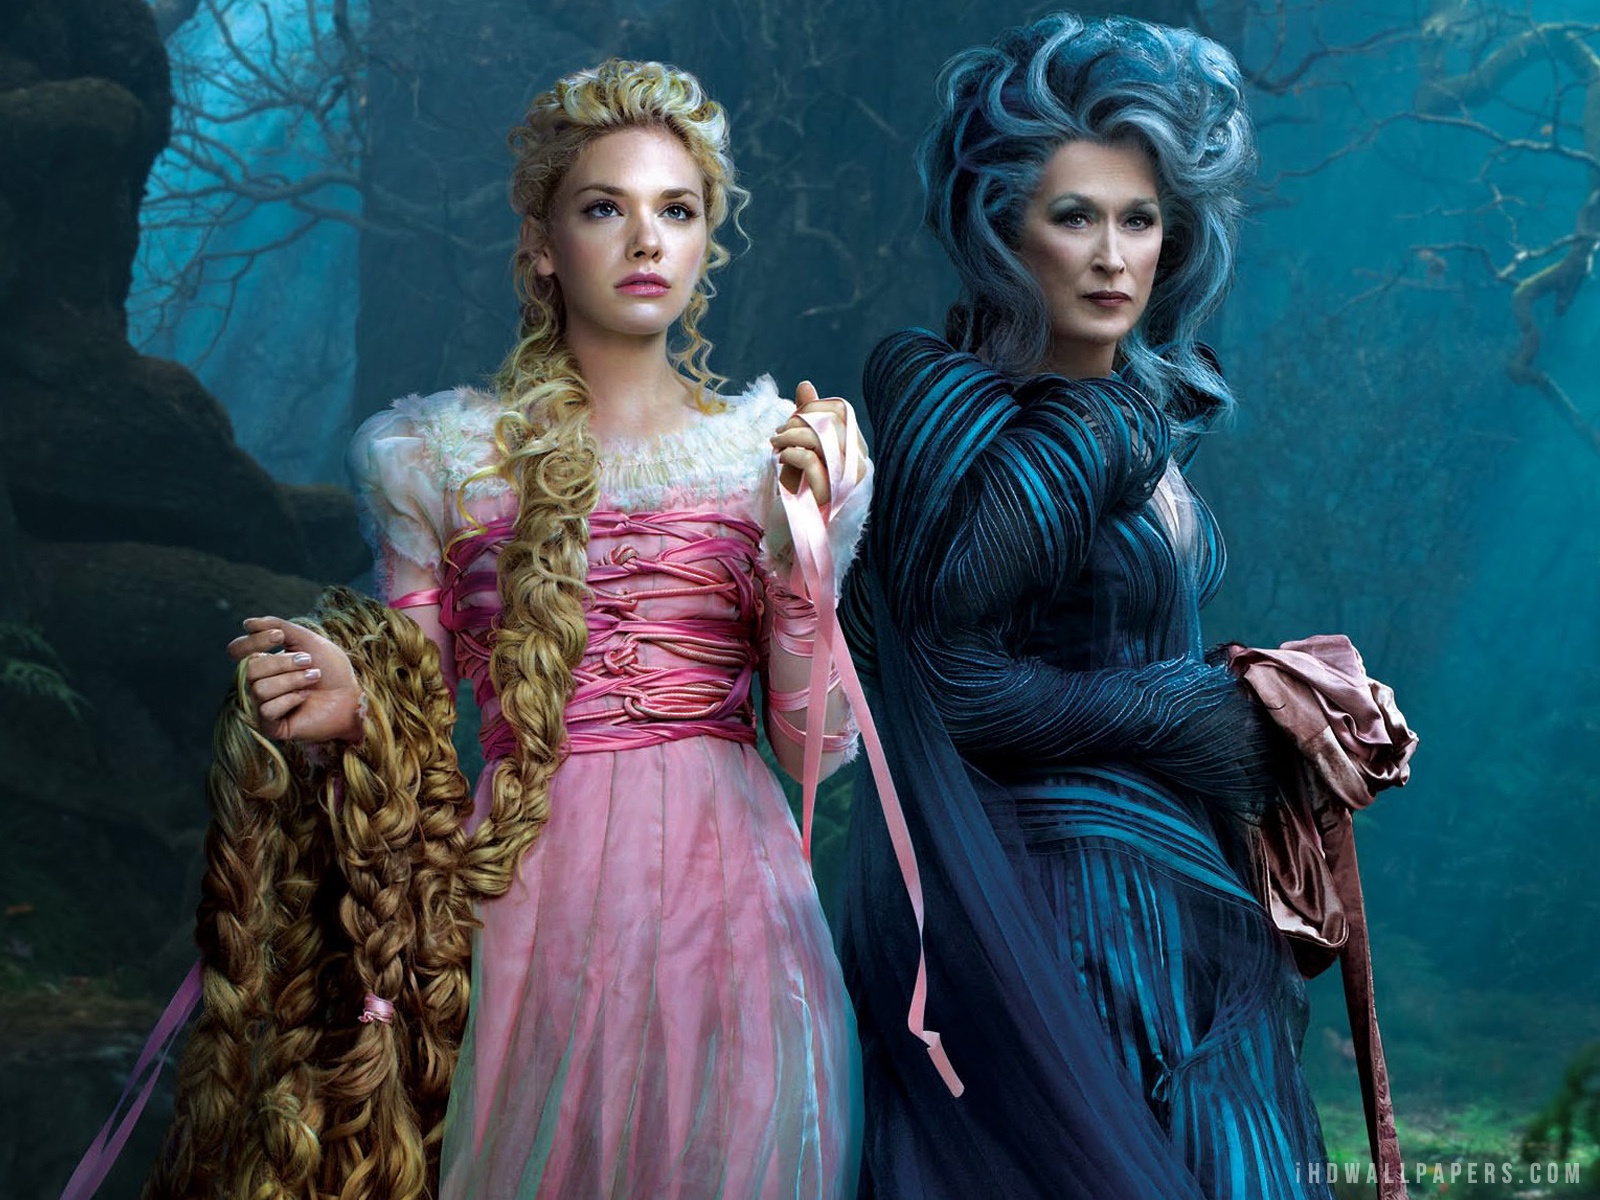 Into the Woods Movie 2 HD Wallpaper   iHD Wallpapers